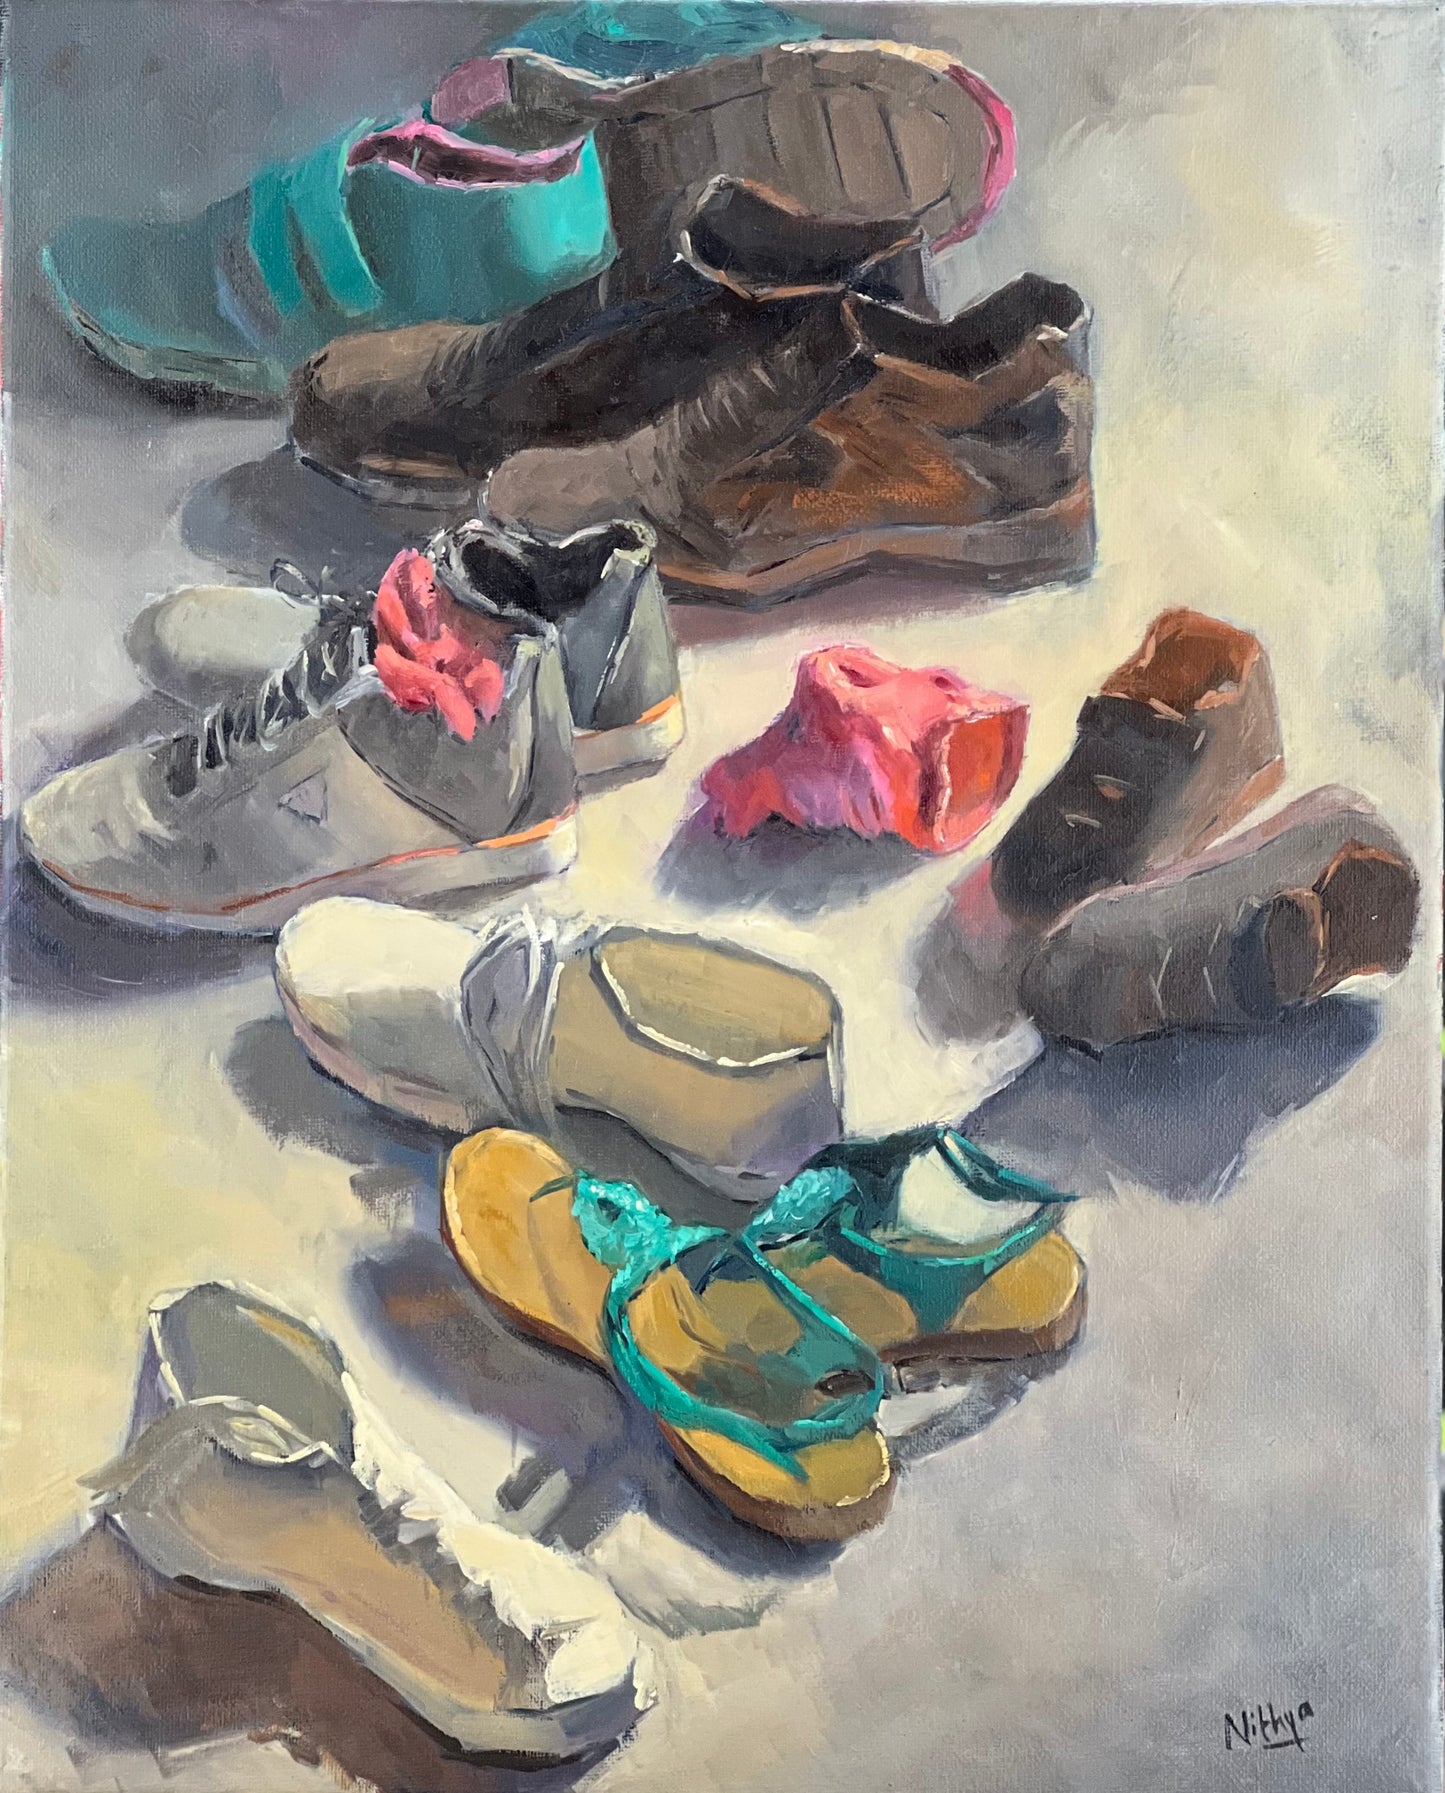 Shoes and stories - Large Oil Painting